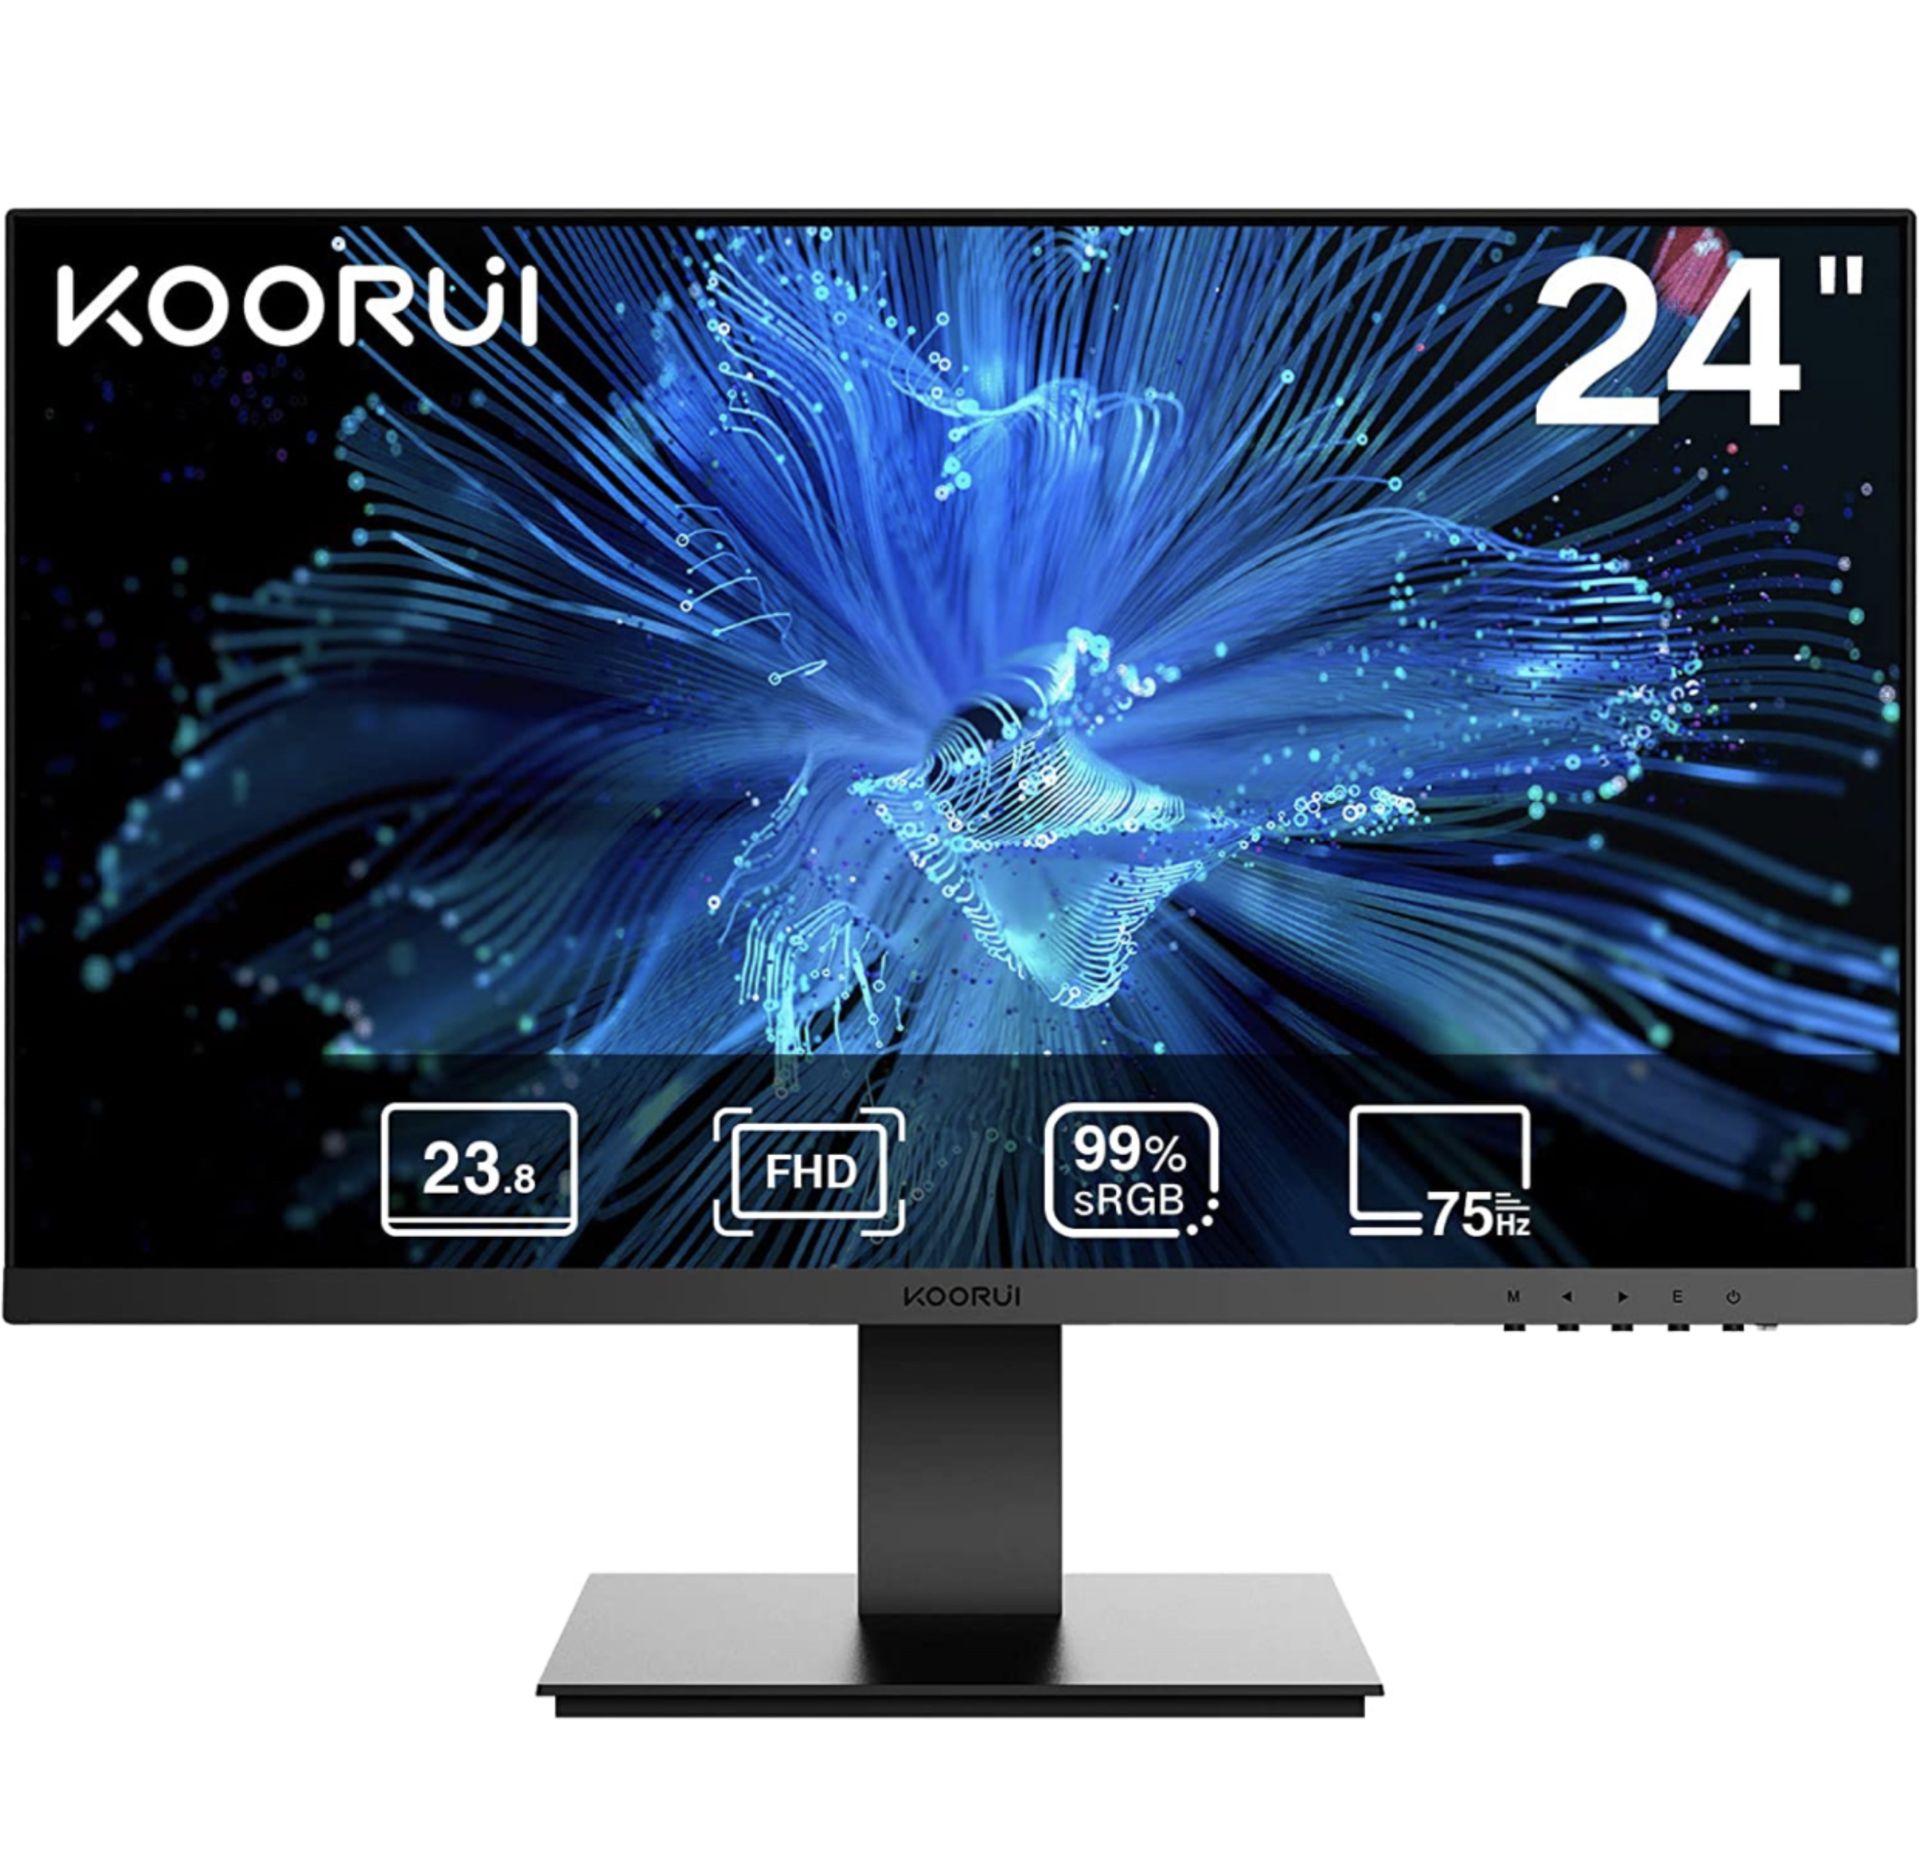 RRP £149 Koorui 24 Inch Monitor Full HD 1920 x 1080p 75Hz 3000:1 Contrast Ratio with HDMI Frameless